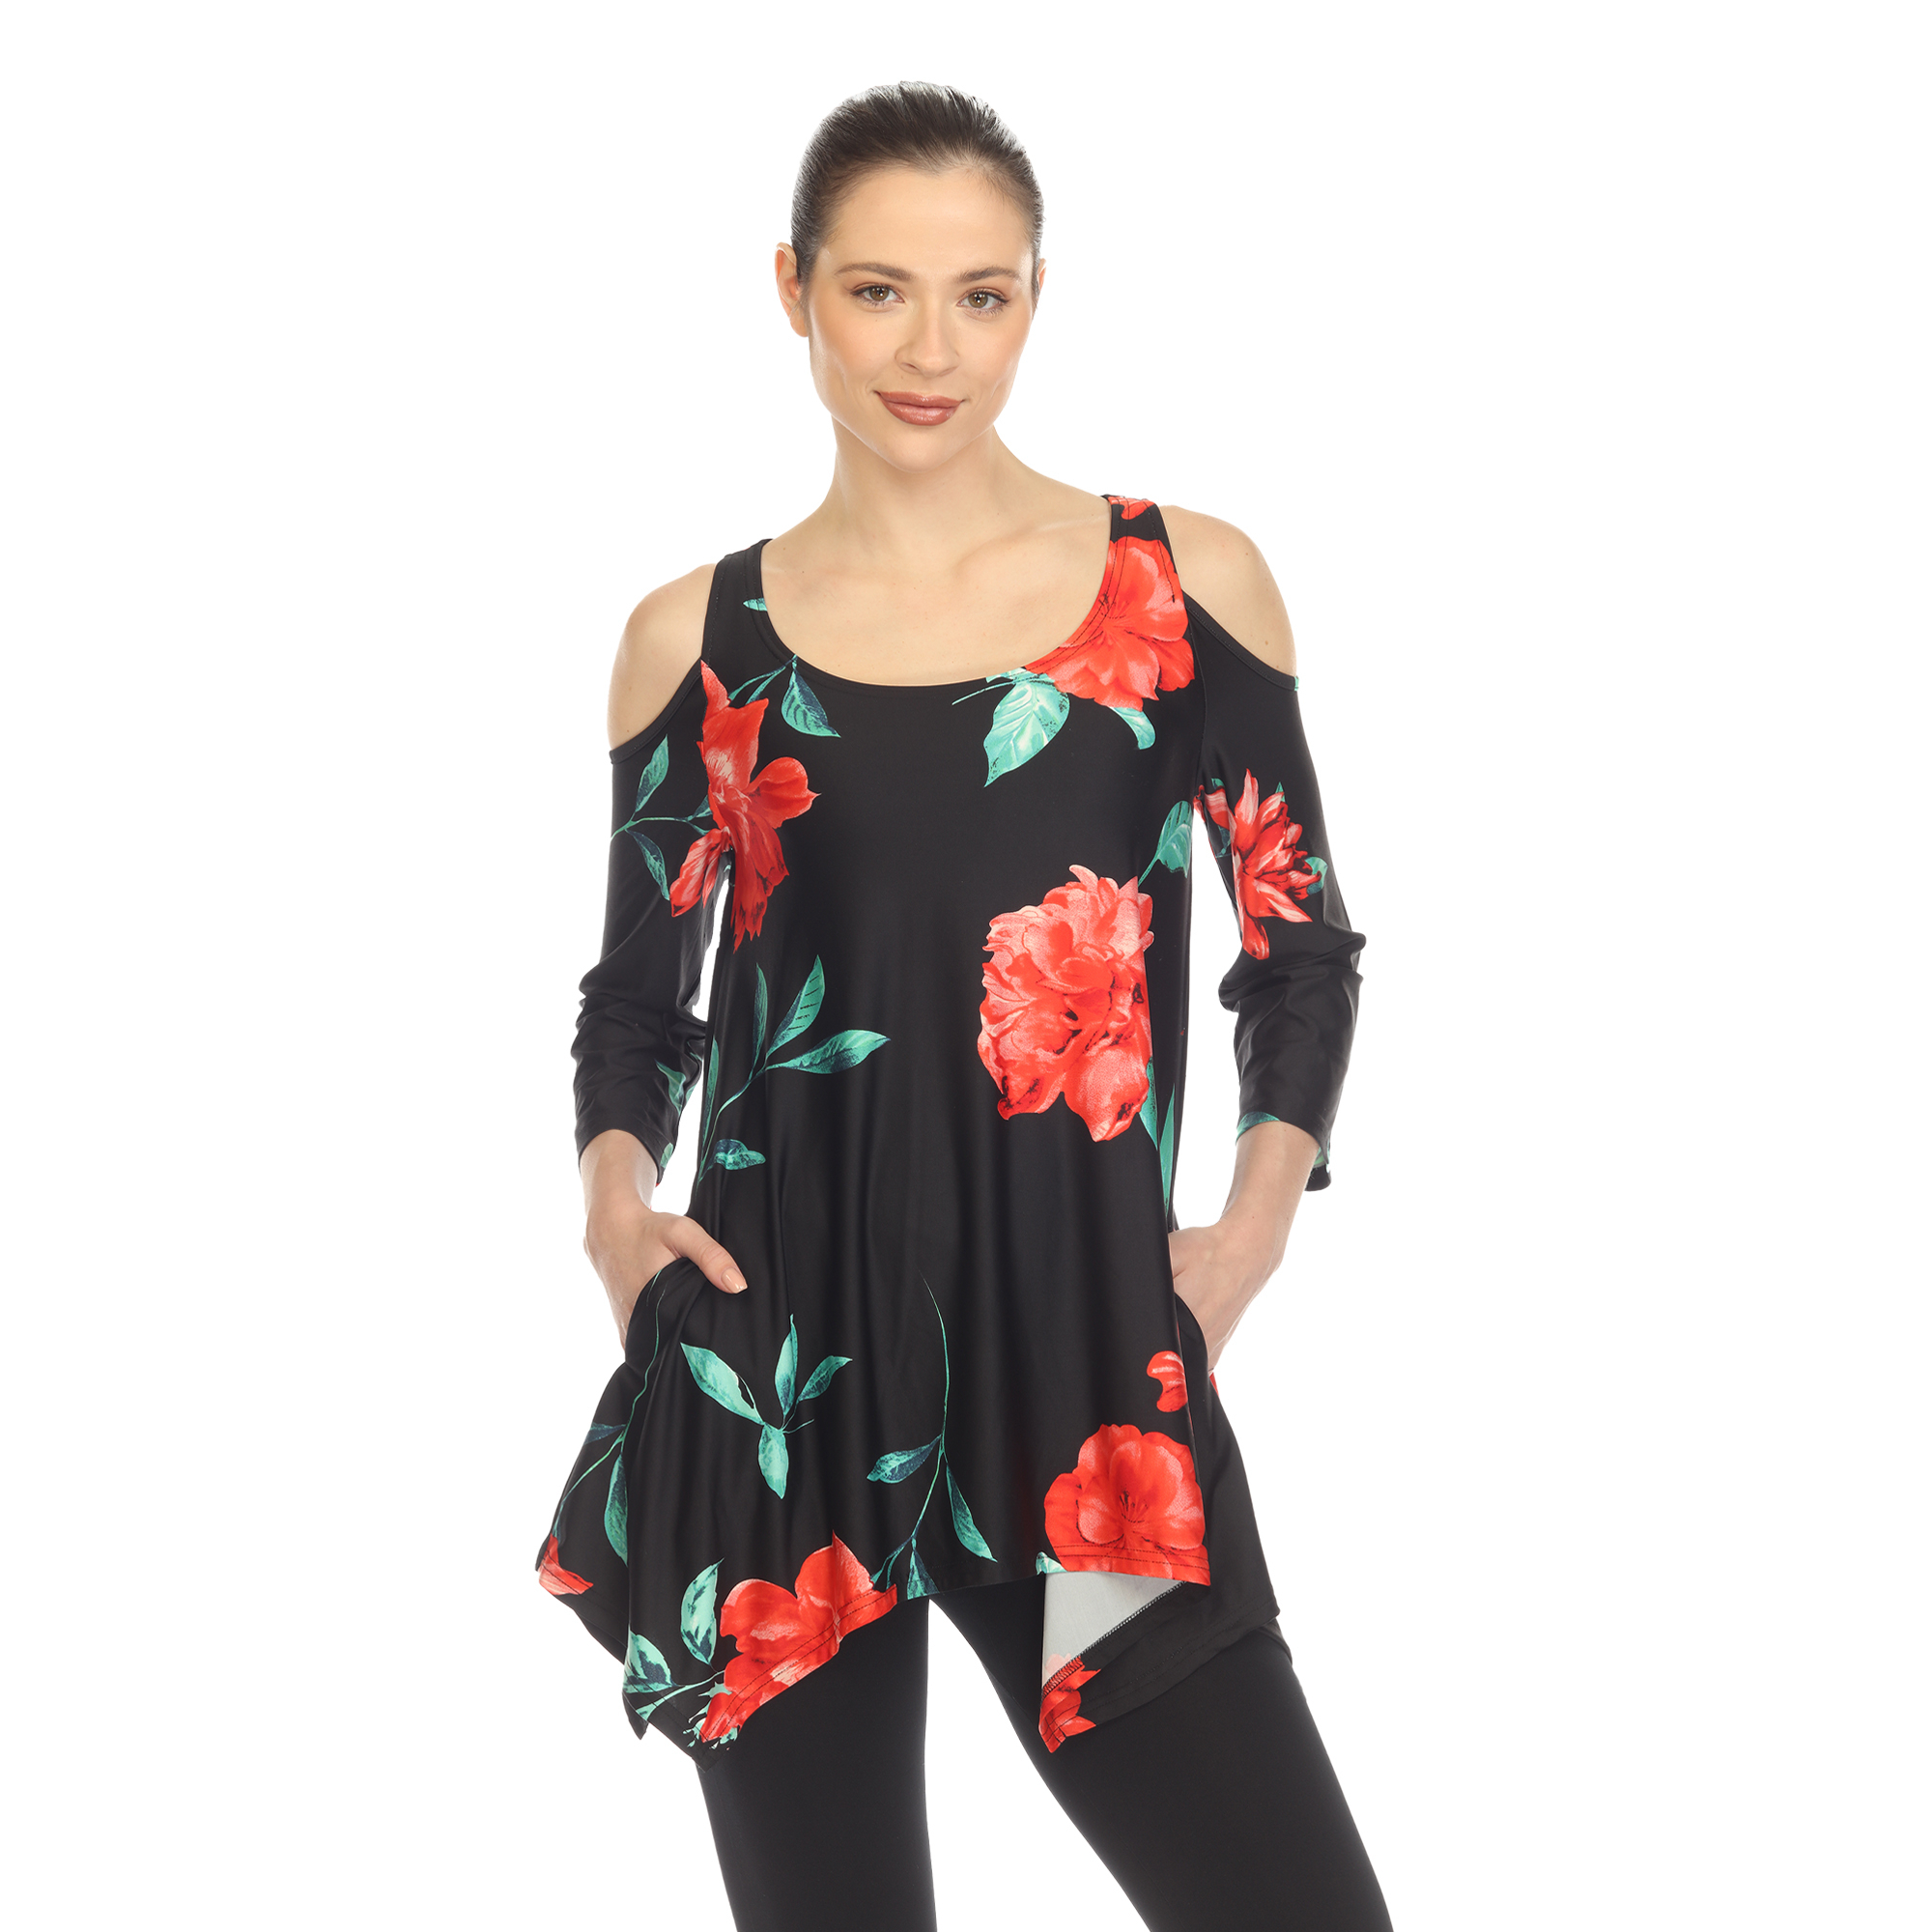 White Mark Women's Floral Print Quarter Sleeve Cold Shoulder Tunic Top With Pockets - Black/Red, Small